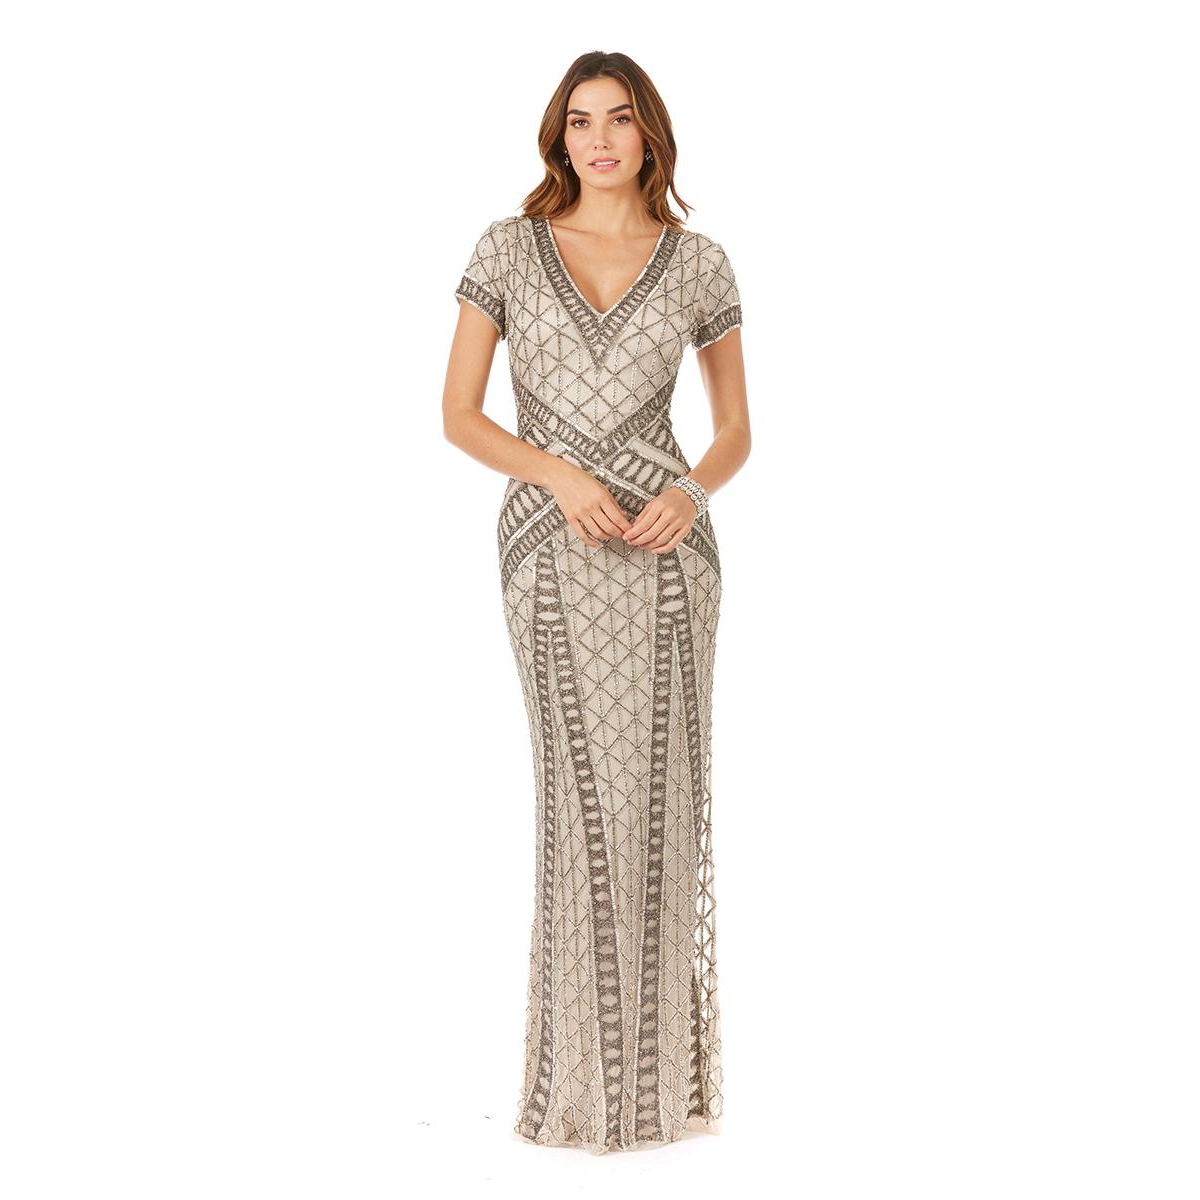 Women's Beaded V-Neckline Dress with Cap Sleeves - Silver